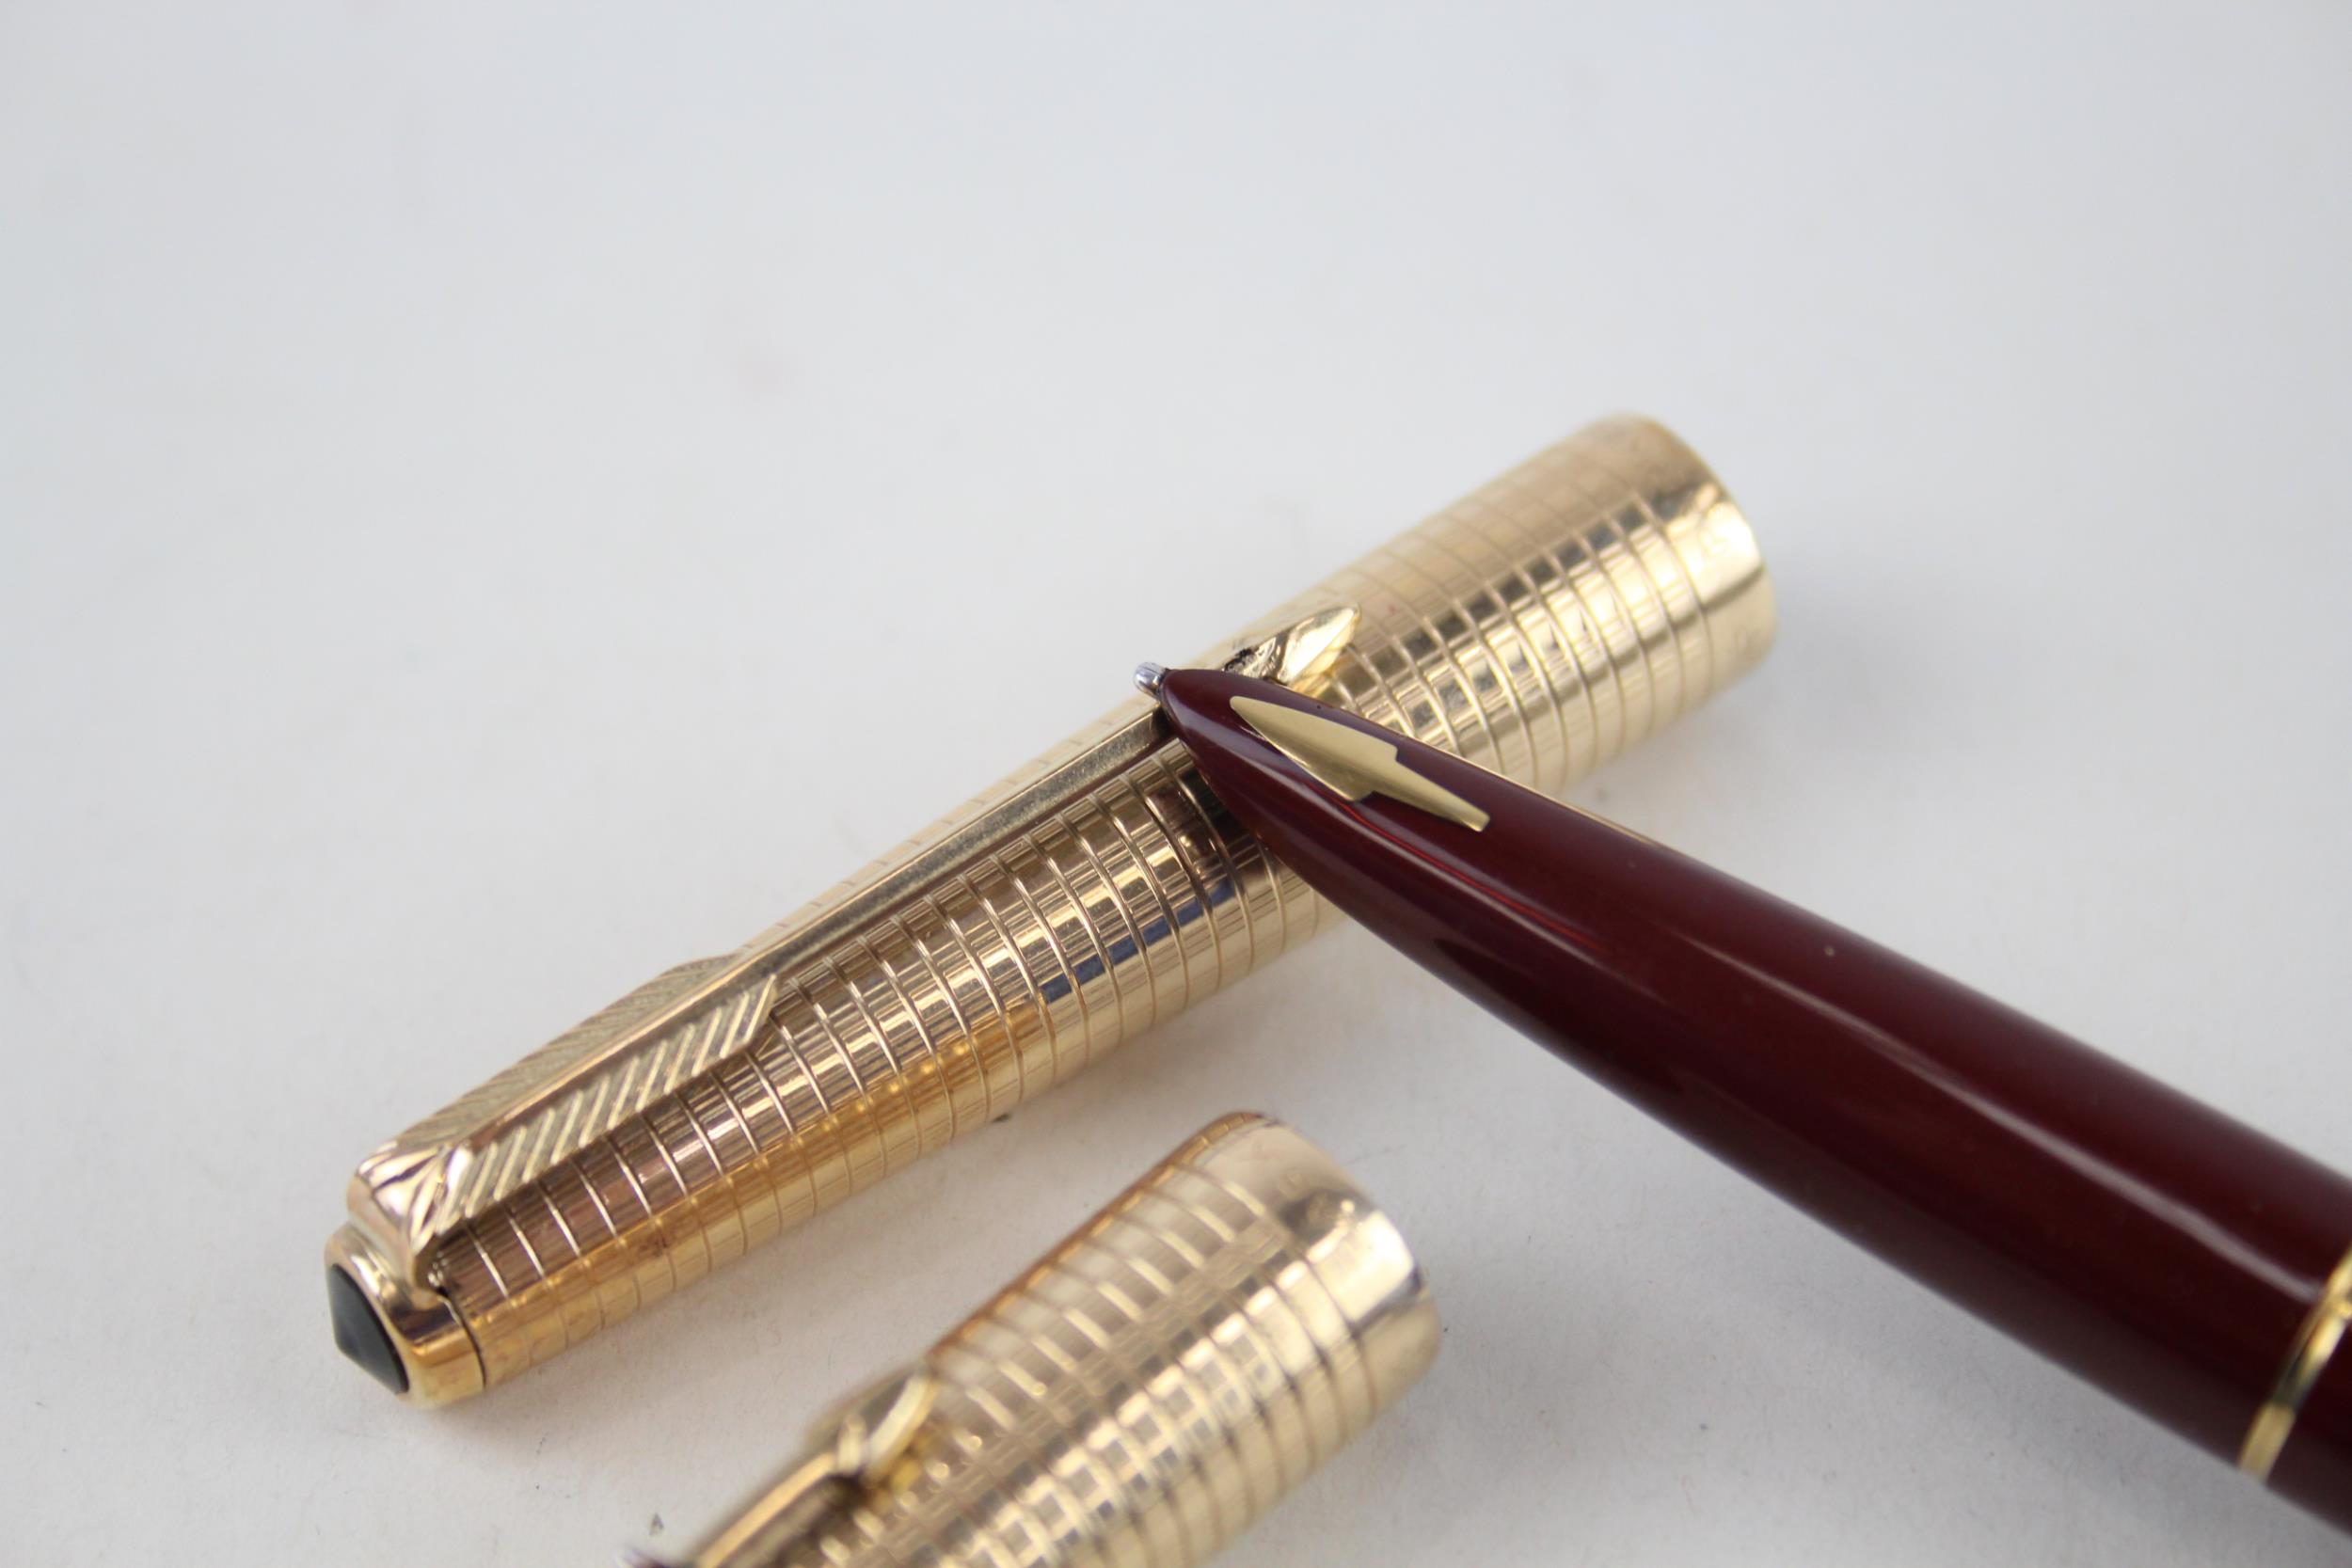 2 x Vintage PARKER 61 Fountain Pens w/ 14ct Gold Nibs, Rolled Gold Caps Etc - Dip Tested & WRITING - Image 2 of 5